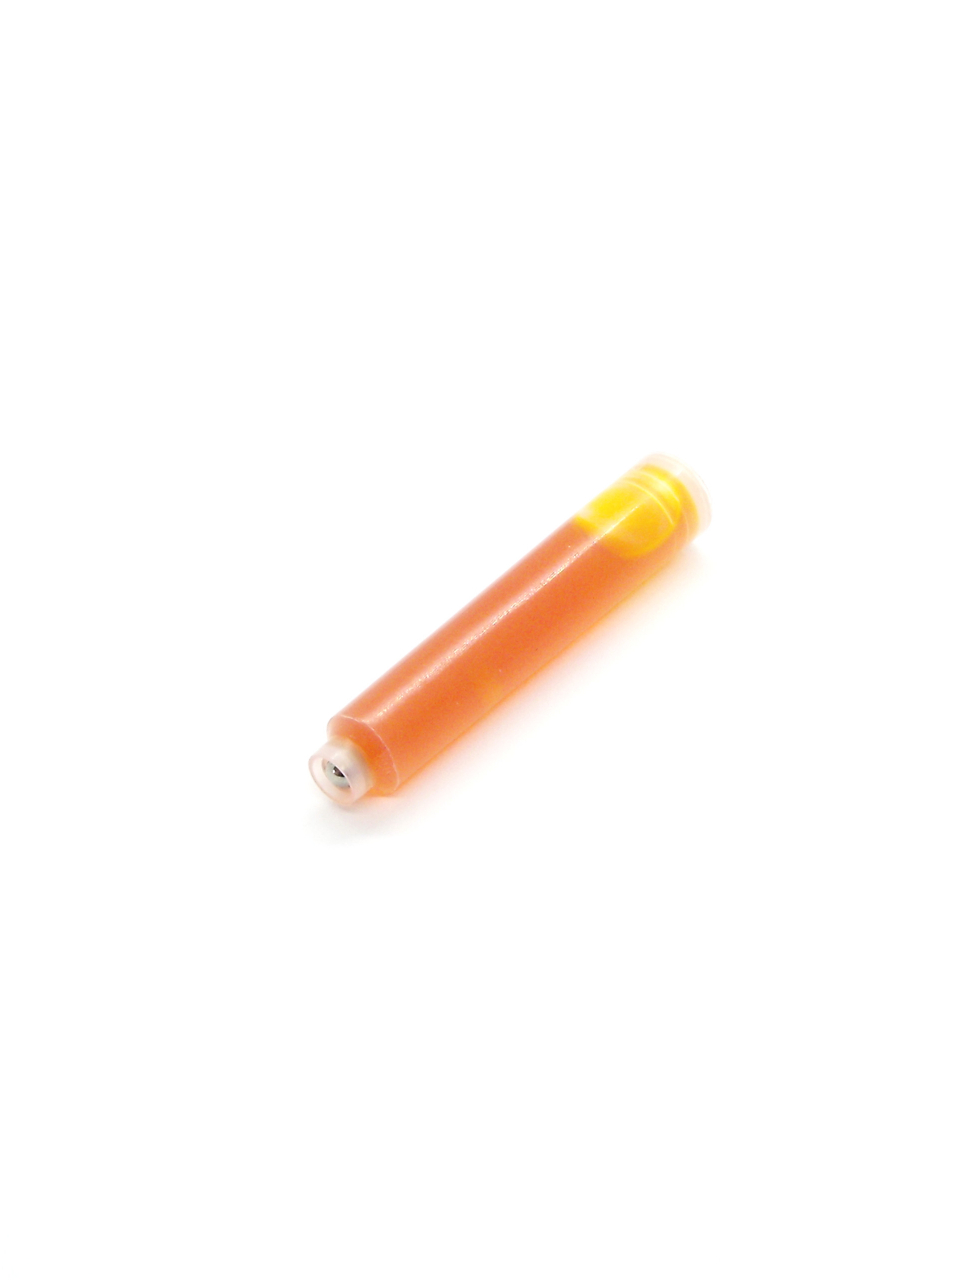 Cartridges For Tombow Fountain Pens (Yellow)